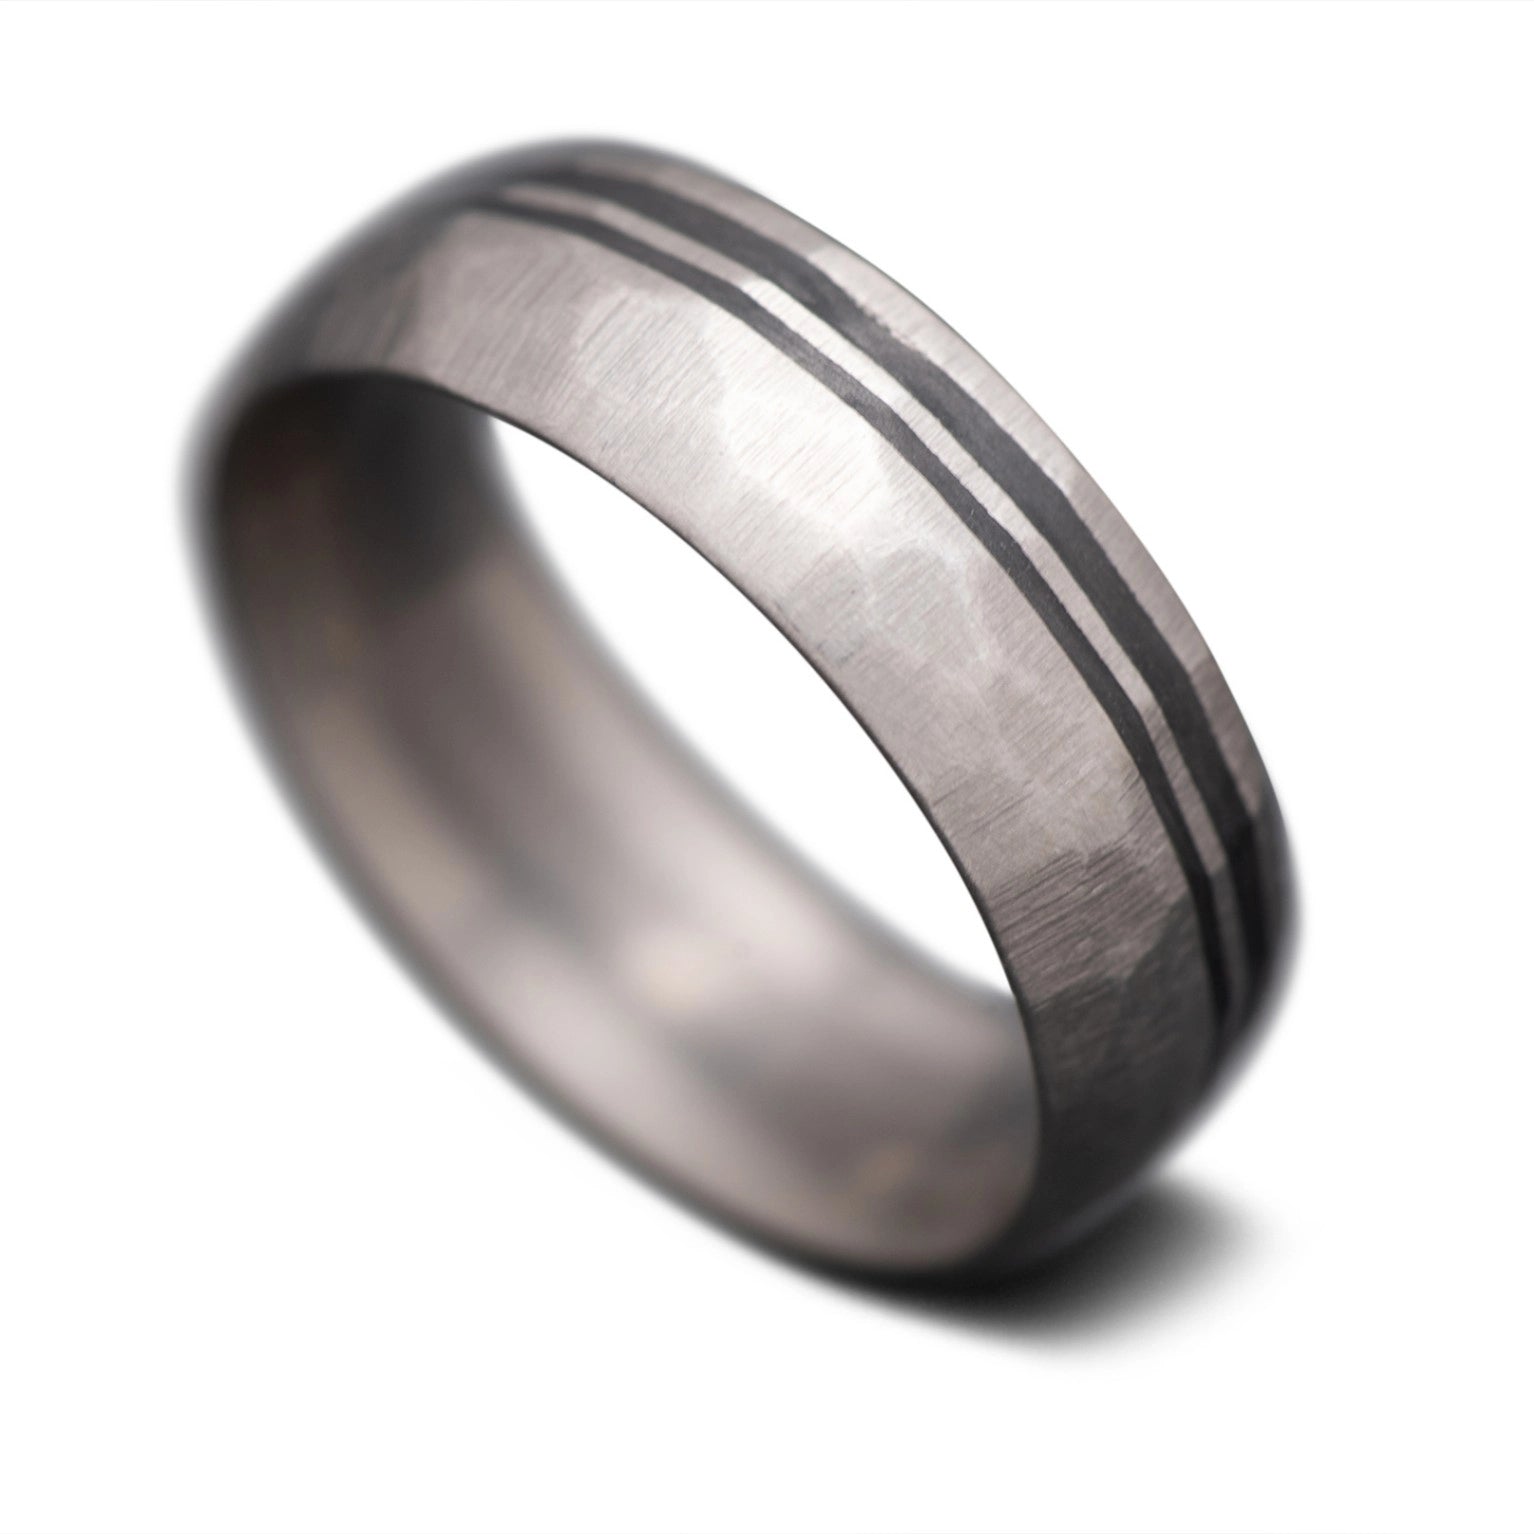 Titanium Core Ring with Unidirectional inlay, 7mm -THE GUARDIAN